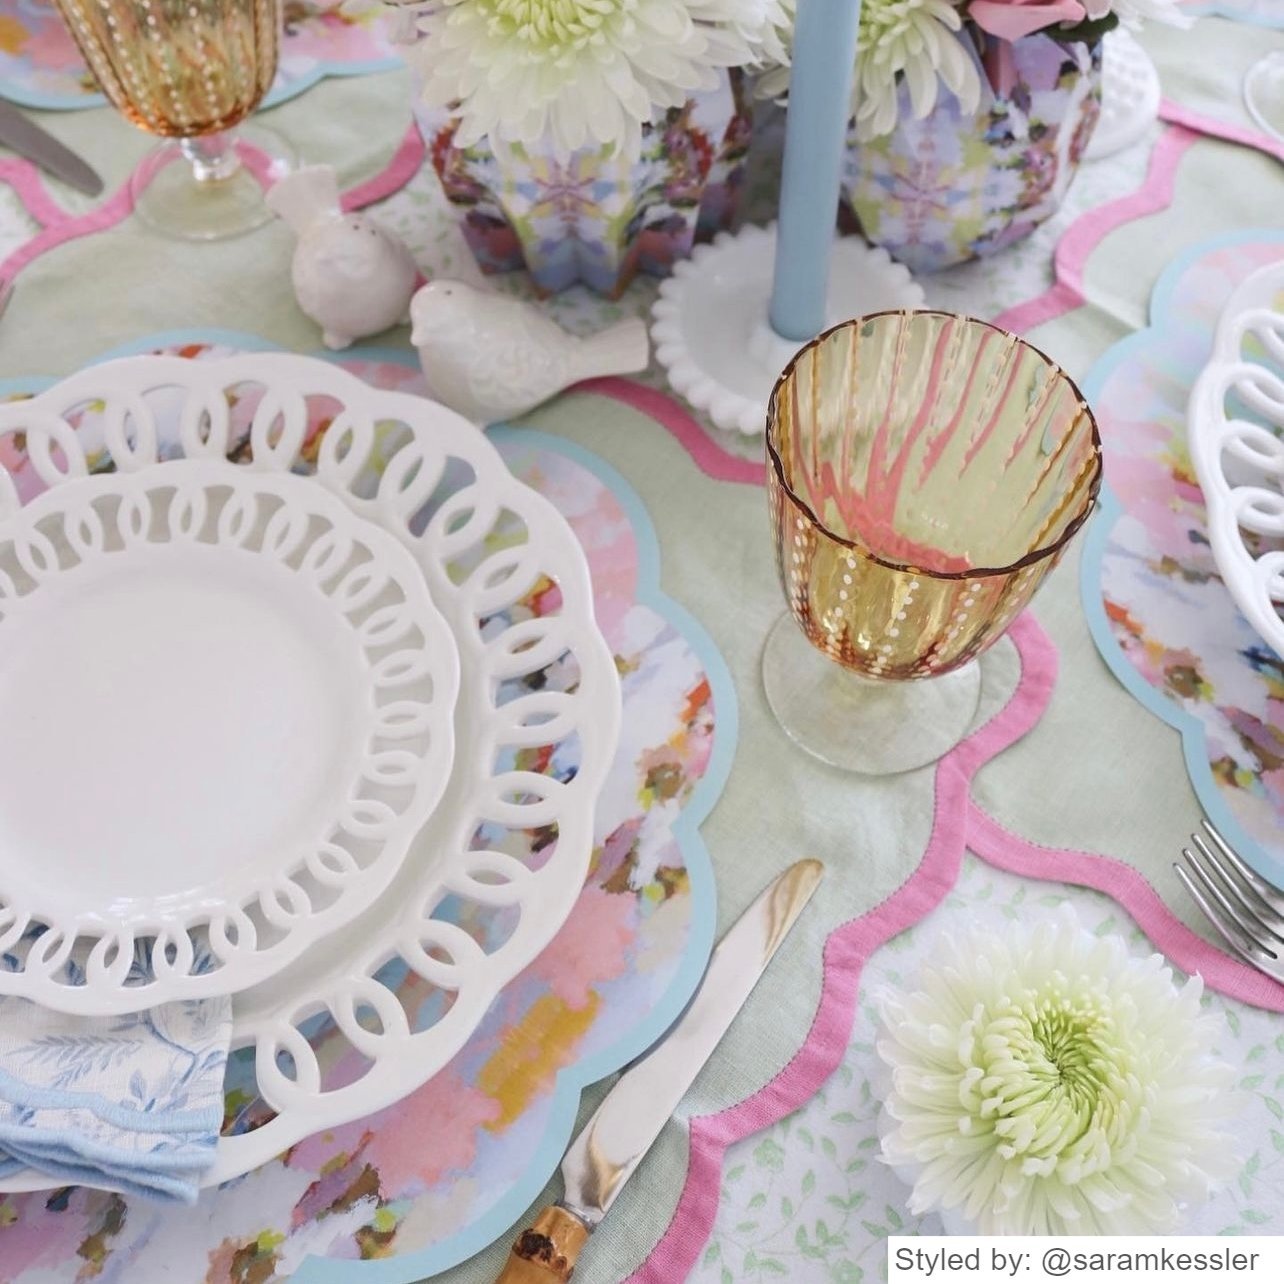 Table set with pink and blue watercolor scalloped paper placemats layered with blue dishes